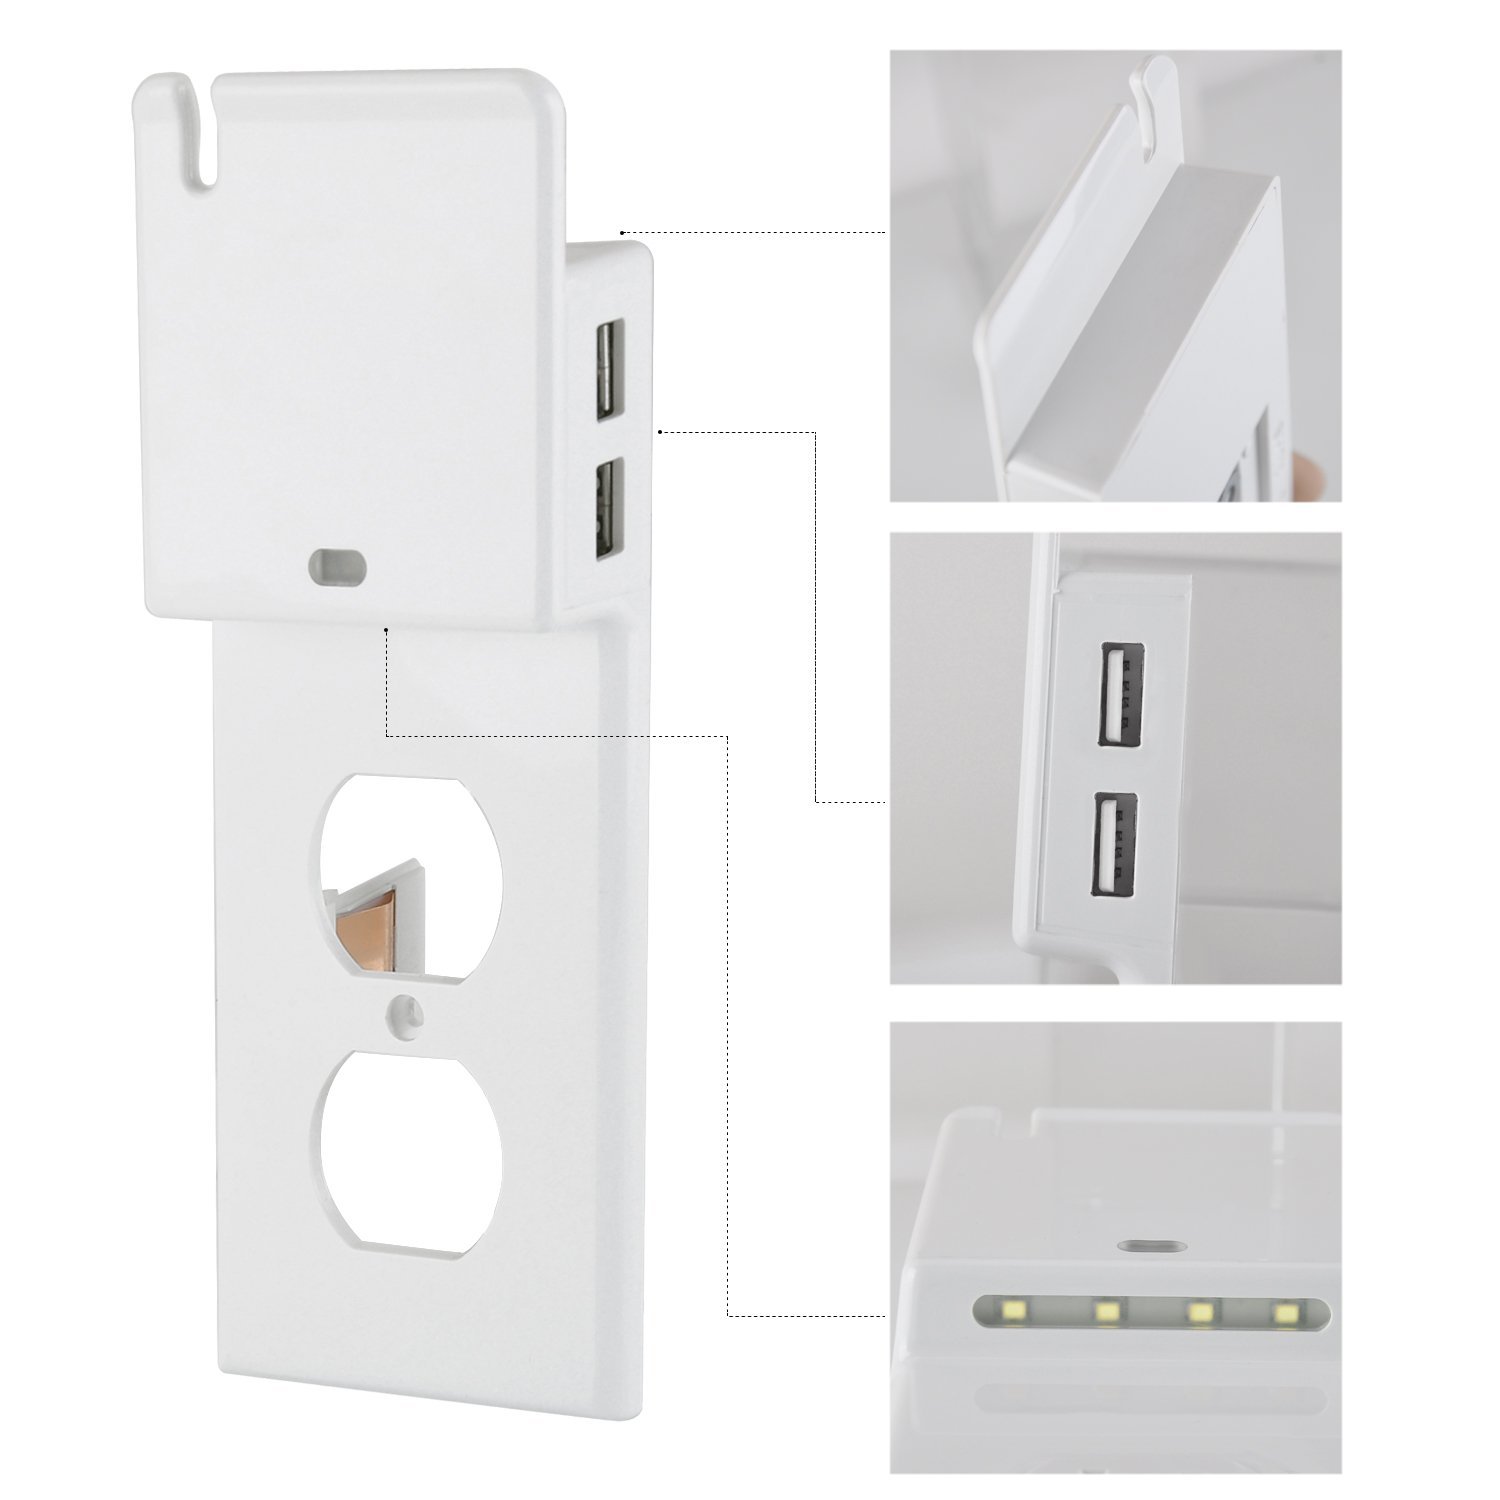 LUSTREON AC110-125V 15A Duplex Decor USB Nightlight Outlet Wall Plate Cover for Light Switches